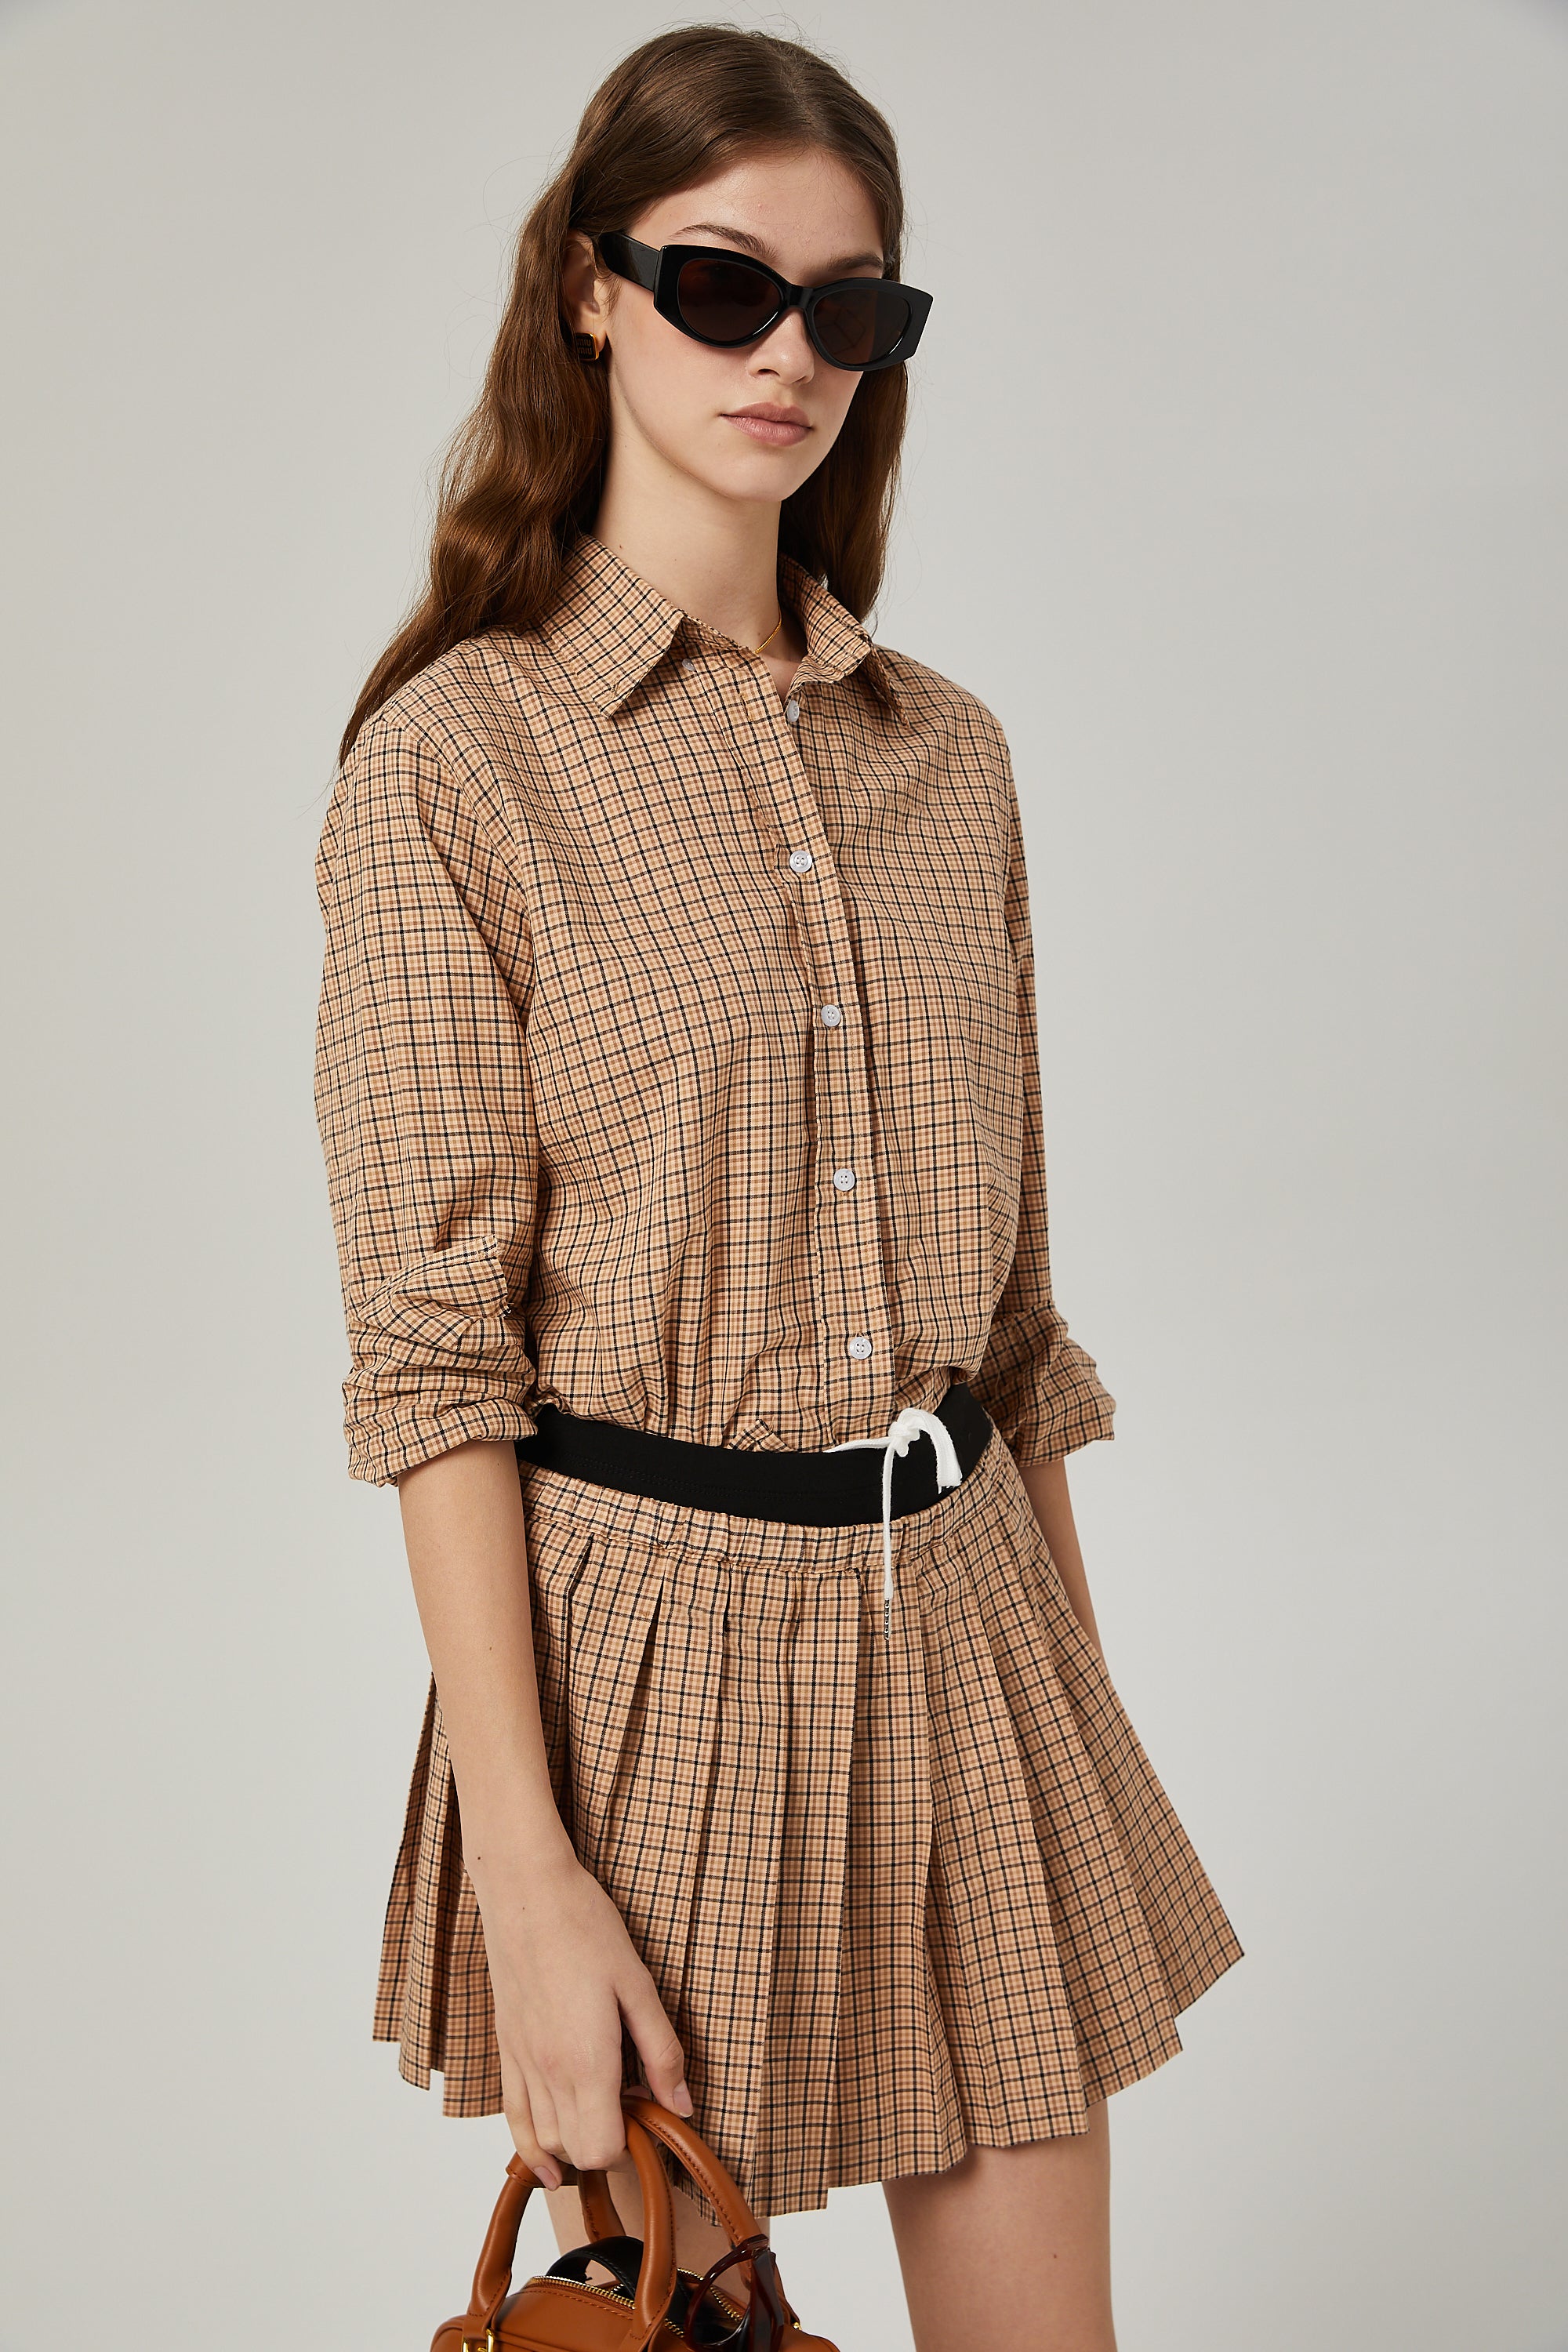 Fabienne checked pattern shirt